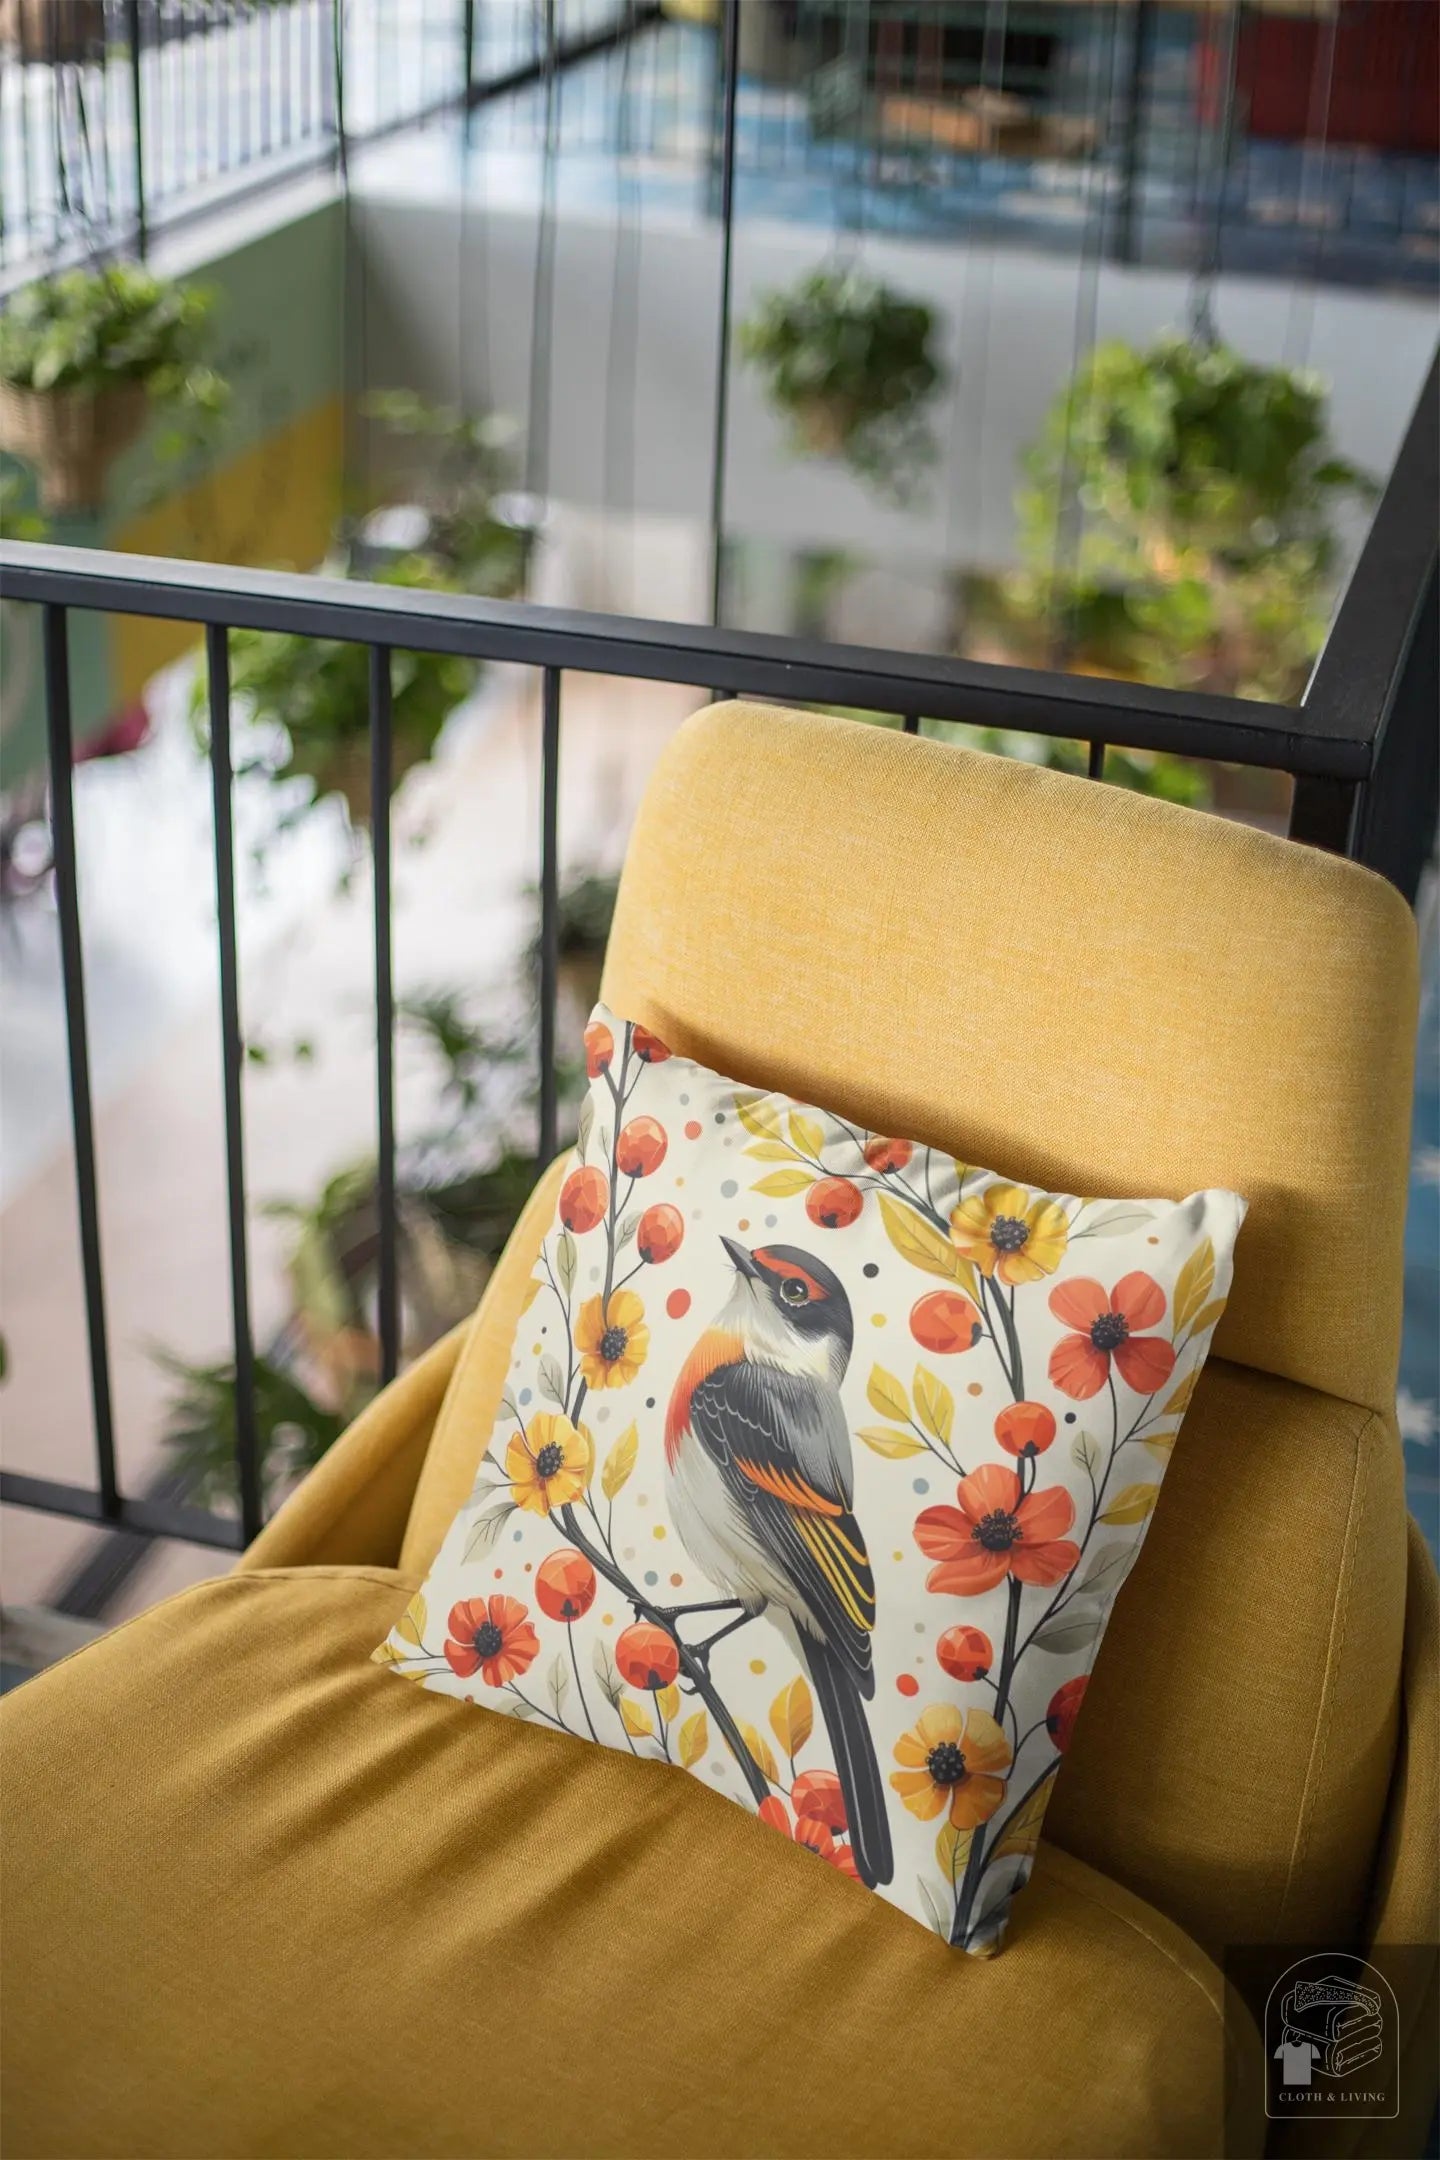 Autumn Serenade - Whimsical Bird & Flowers Pillow (Available in various sizes) -   Cloth & Living